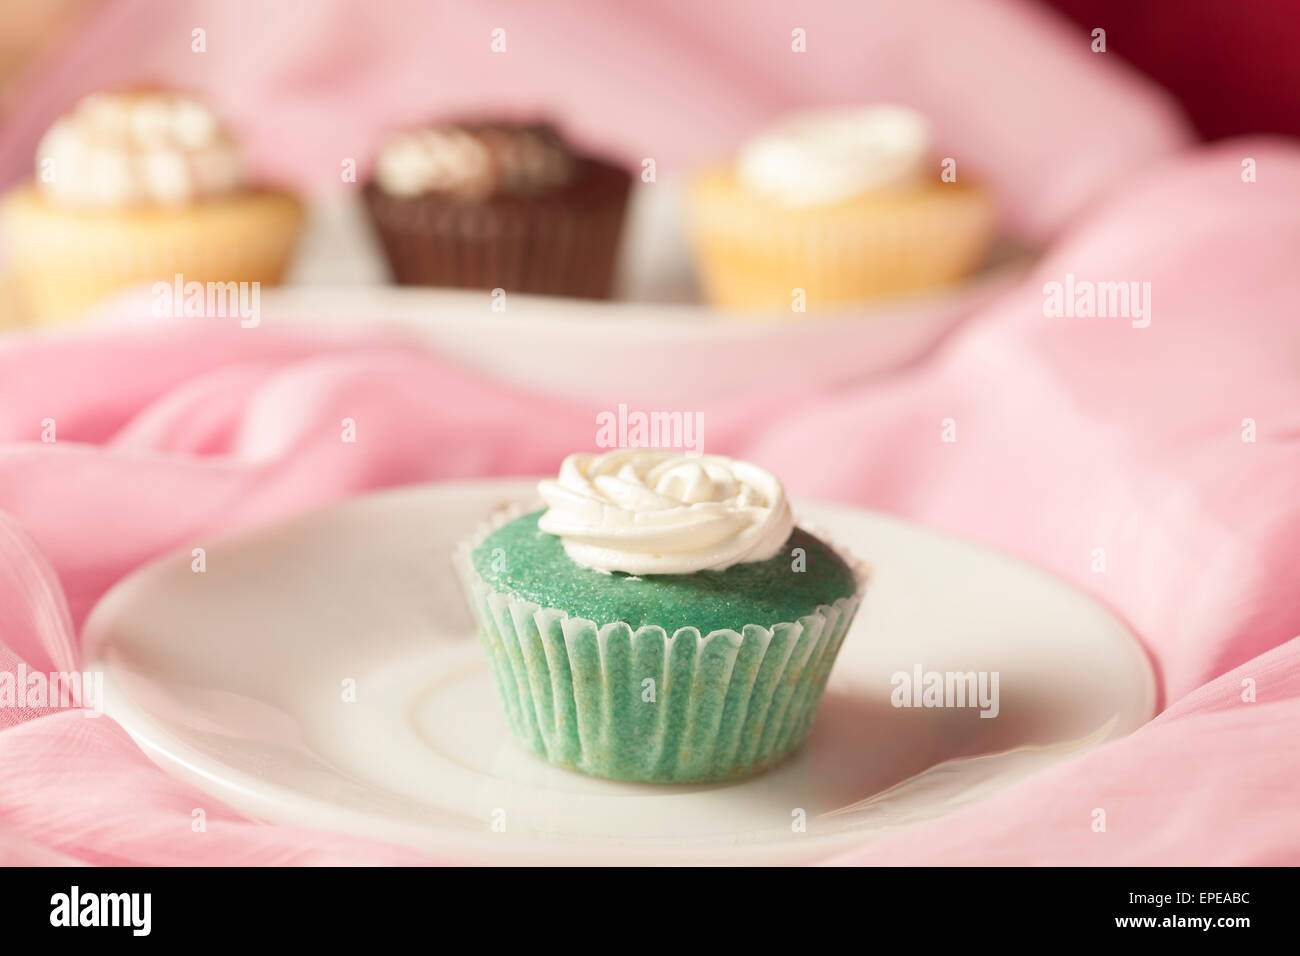 Mint flavour cup cake Stock Photo